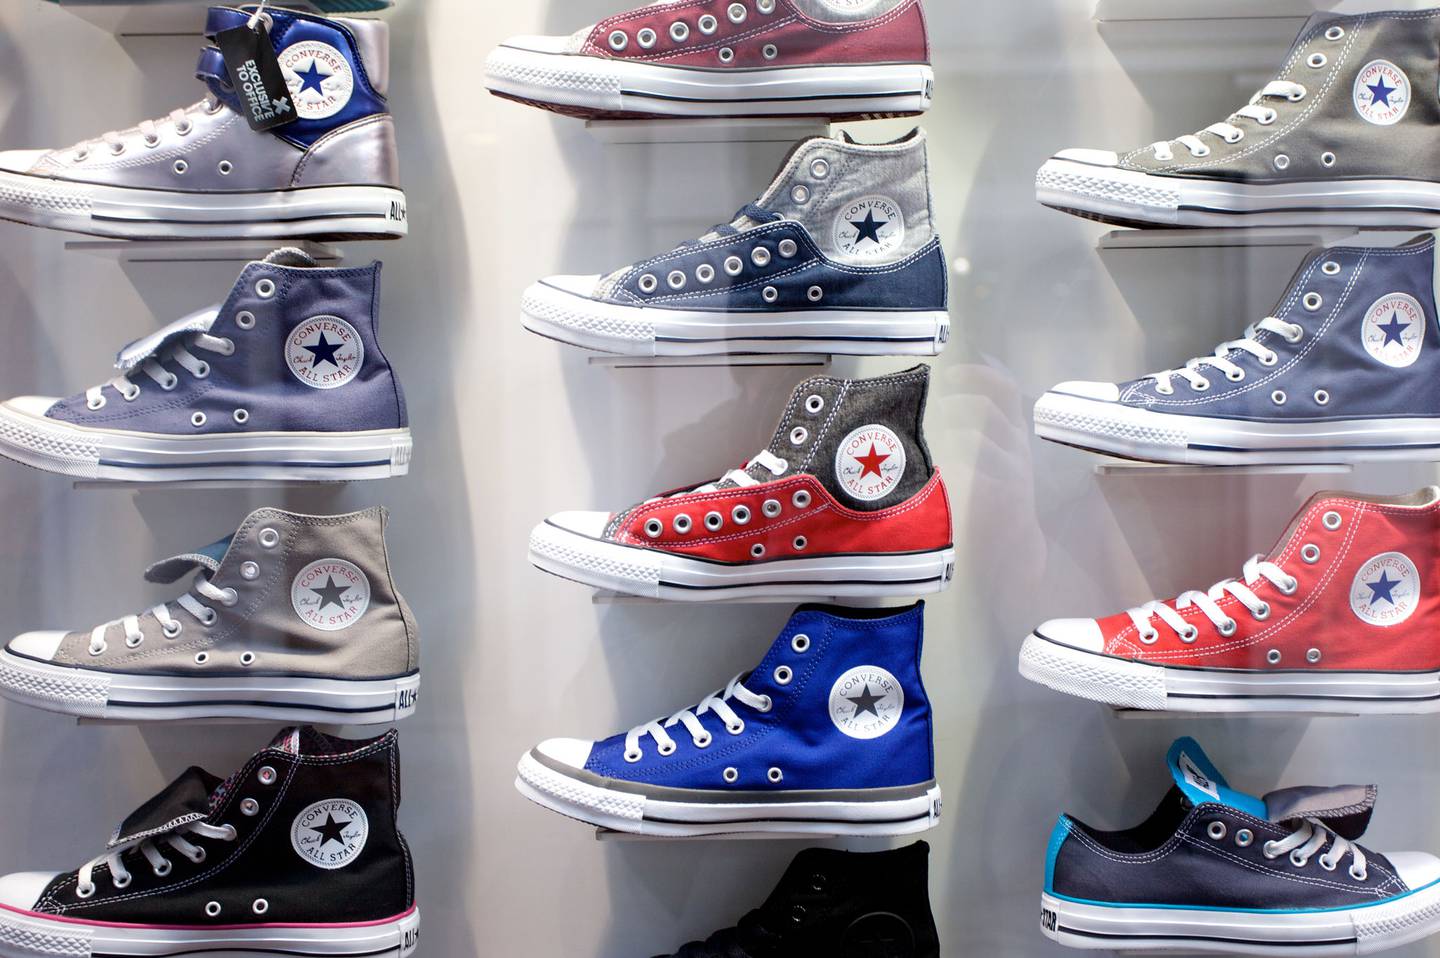 Converse Chuck Taylor All Star sneakers at a sale in London.